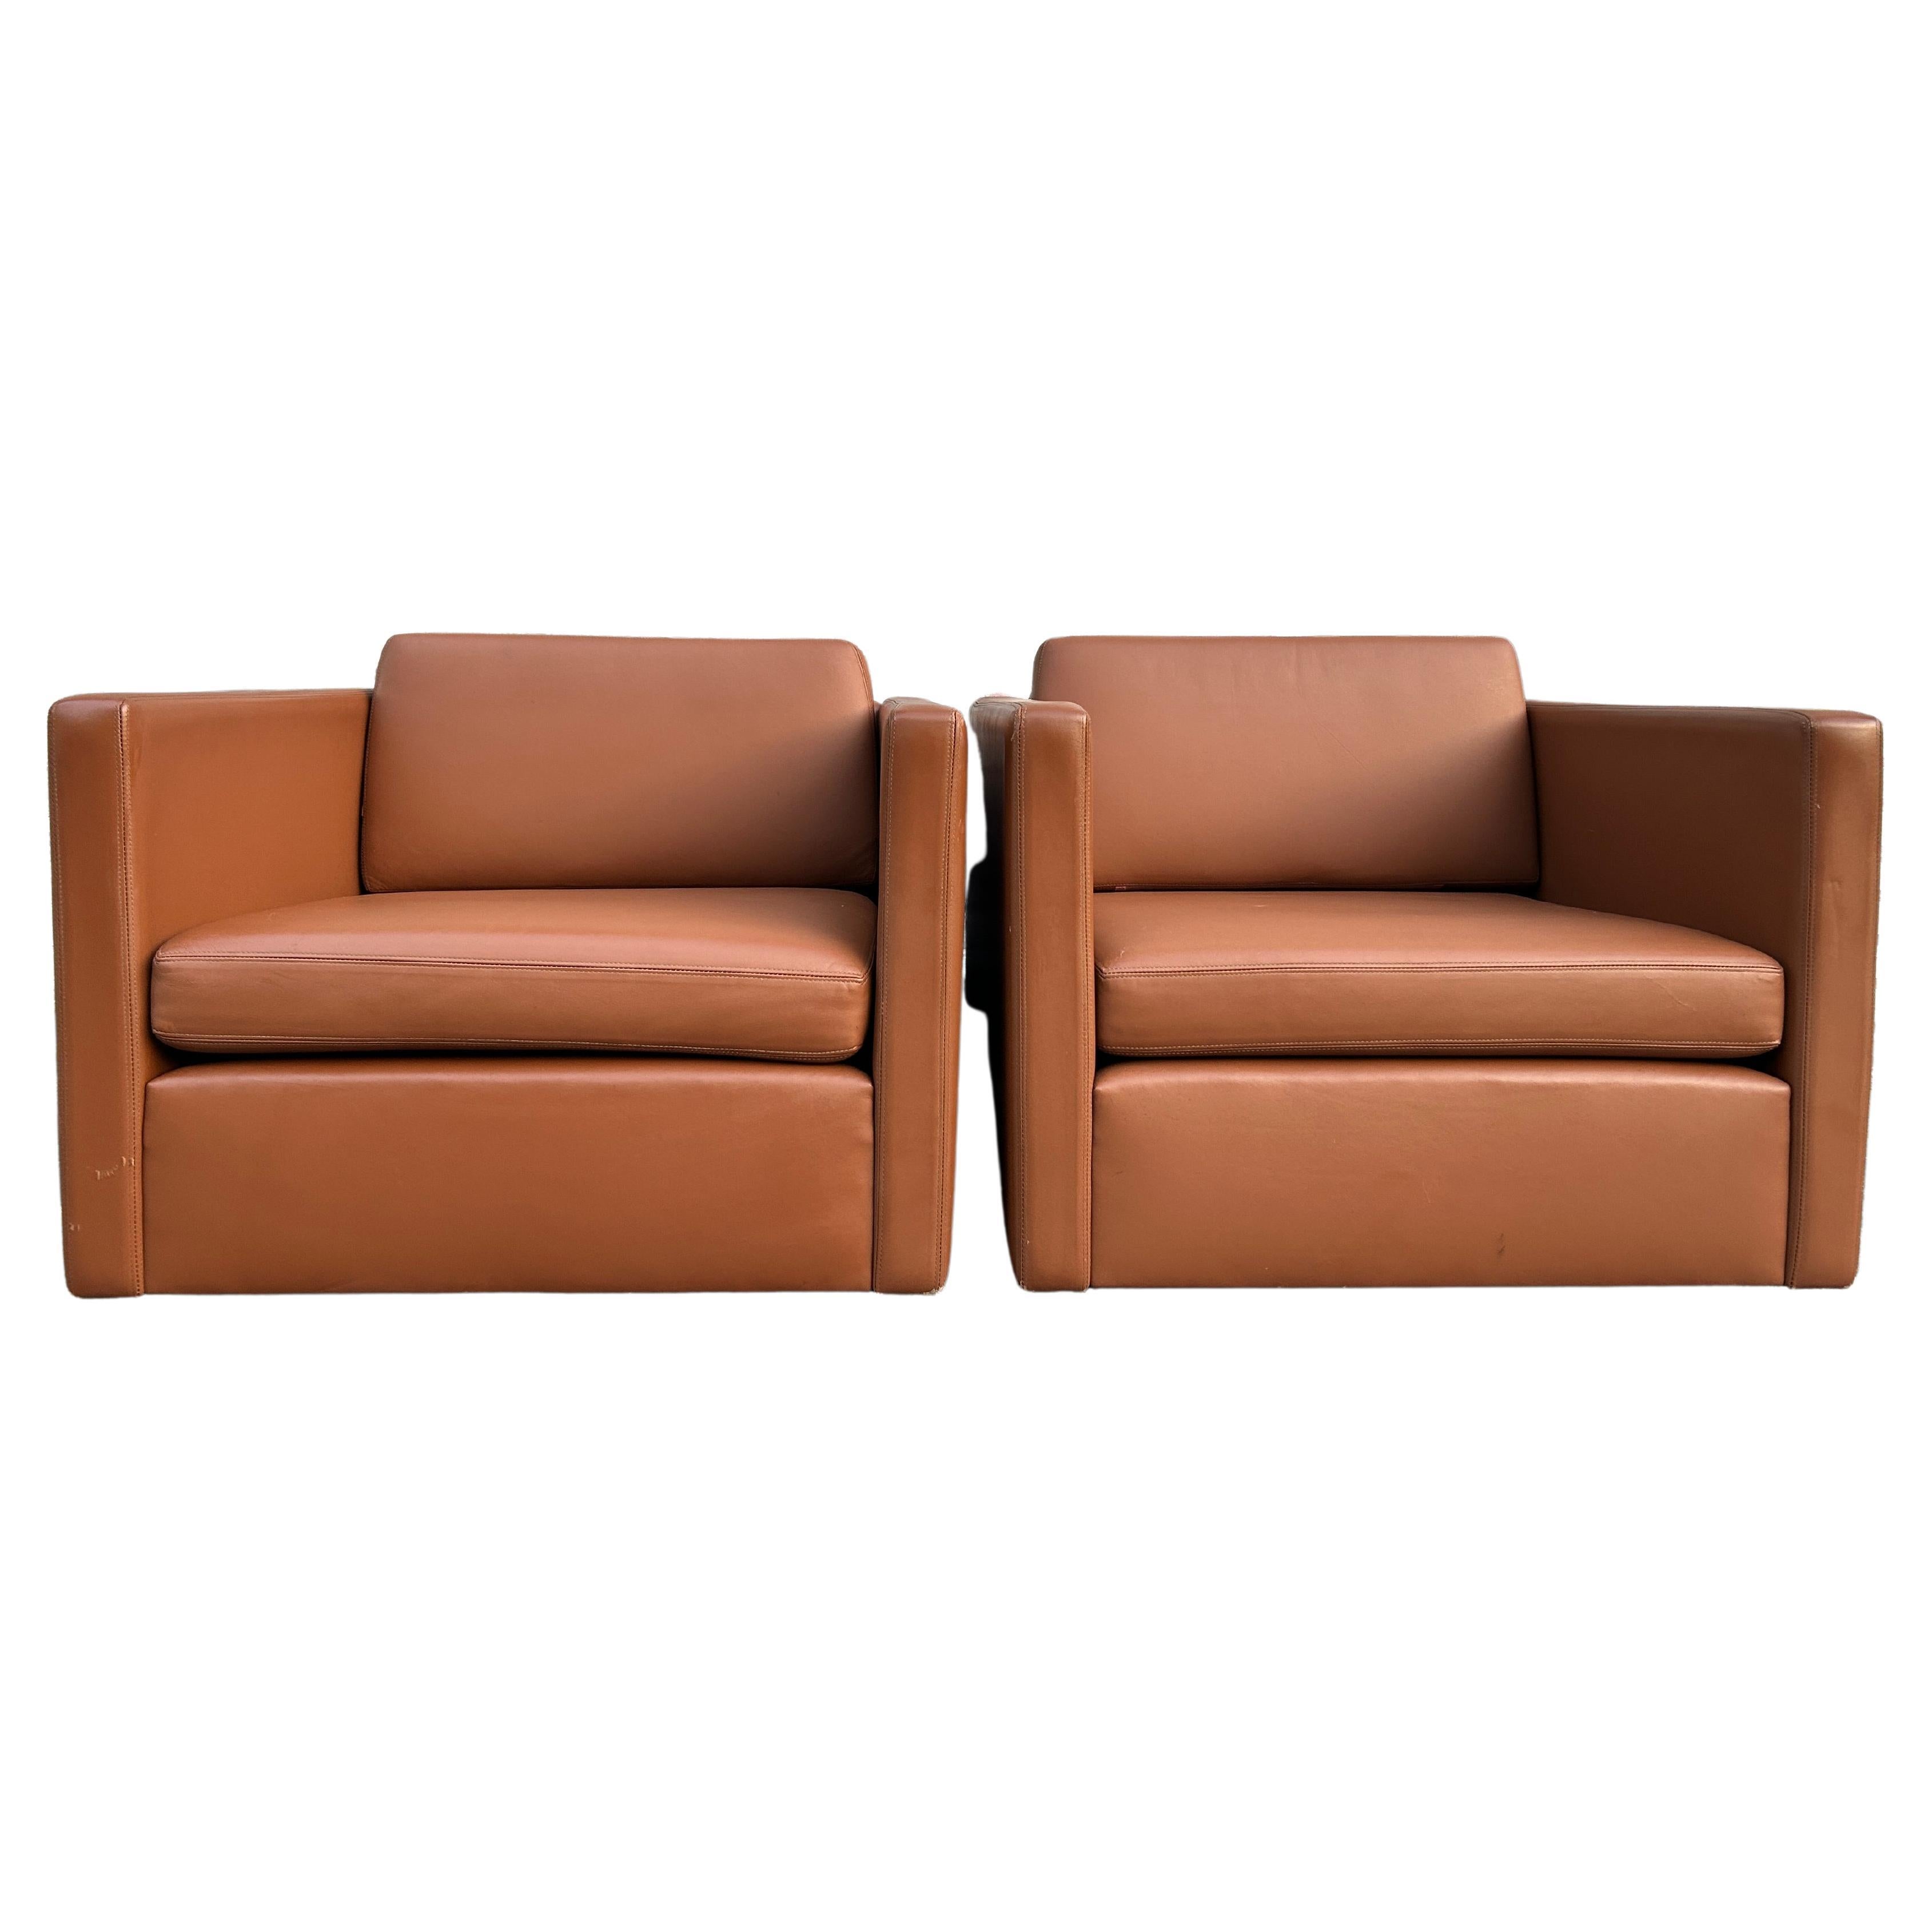 Superb Mid-Century Modern Pfister Cube Lounge Chairs by Knoll in Cognac Leather